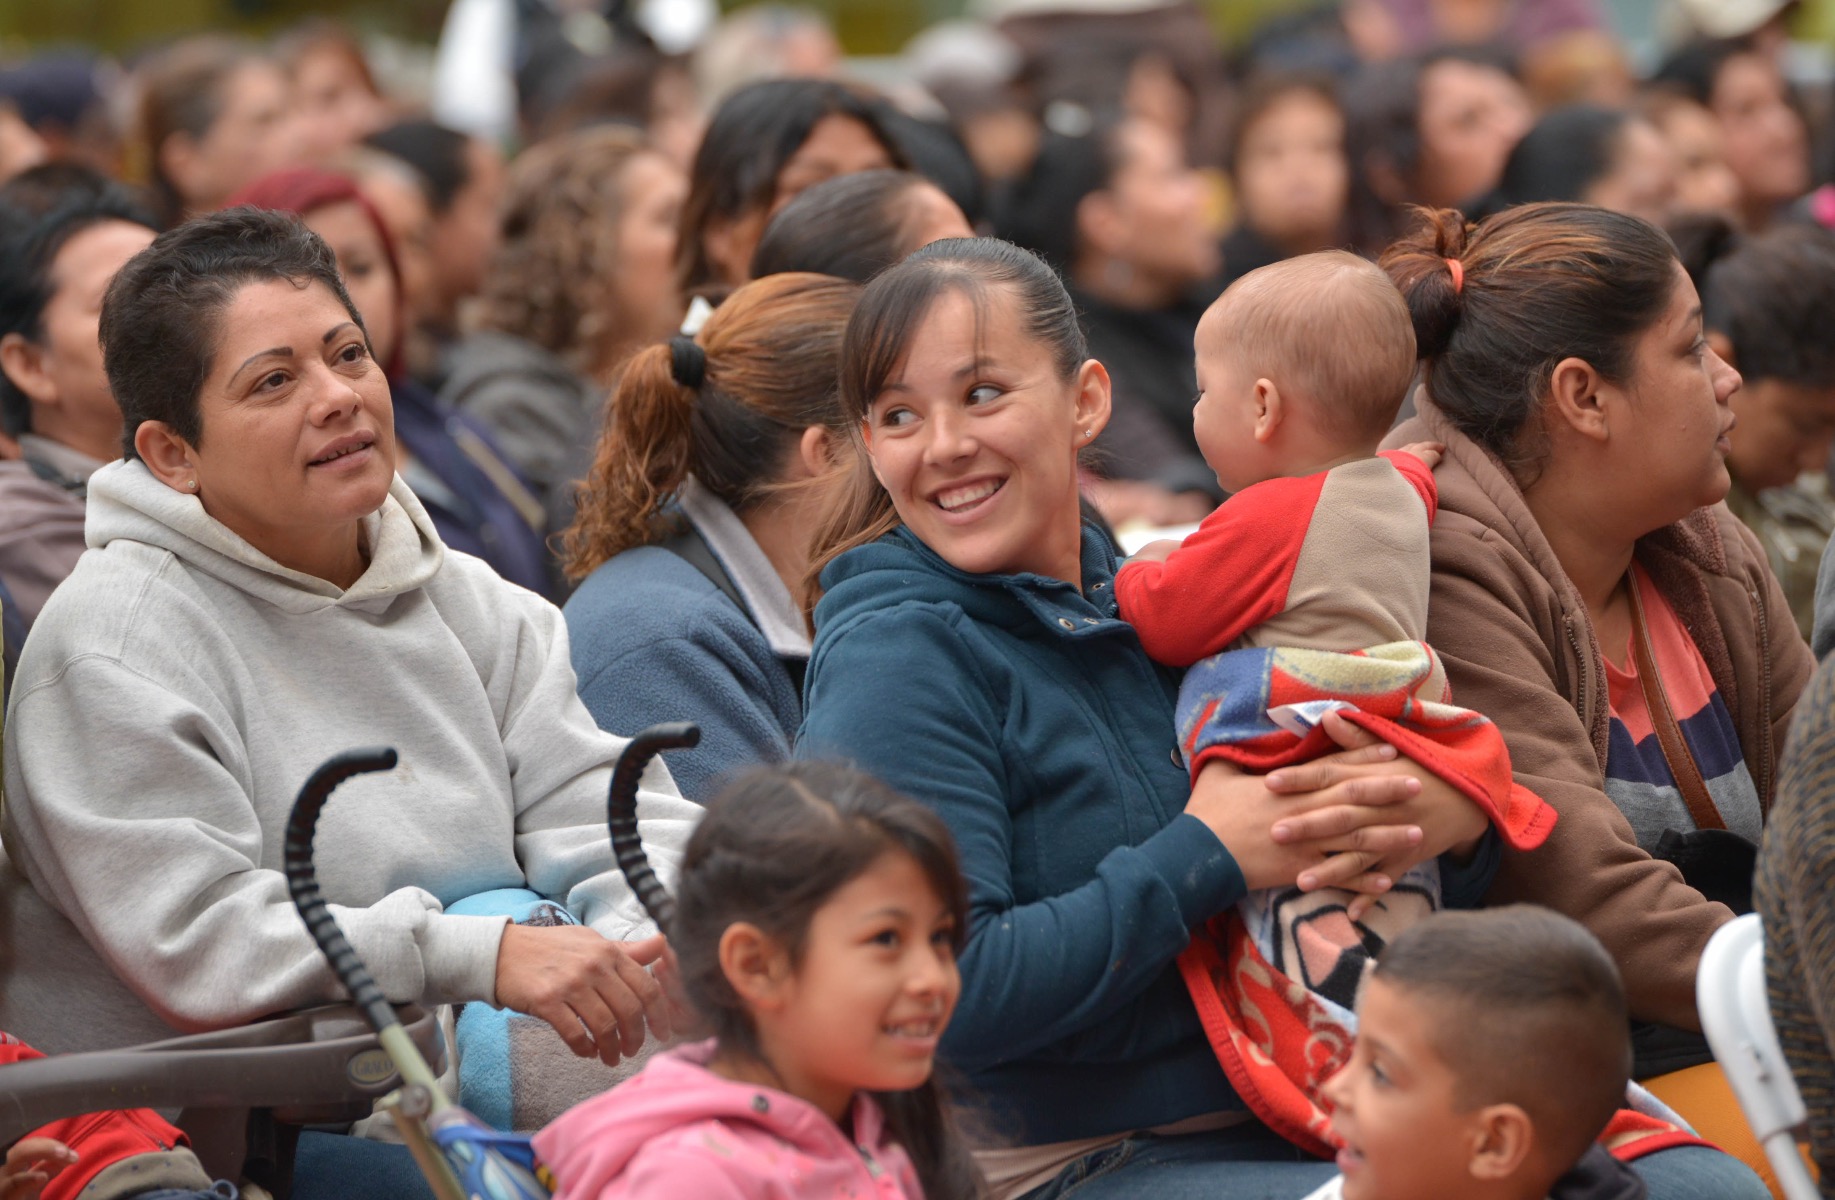 Parents and young children in an outdoor concert smiling at the performers